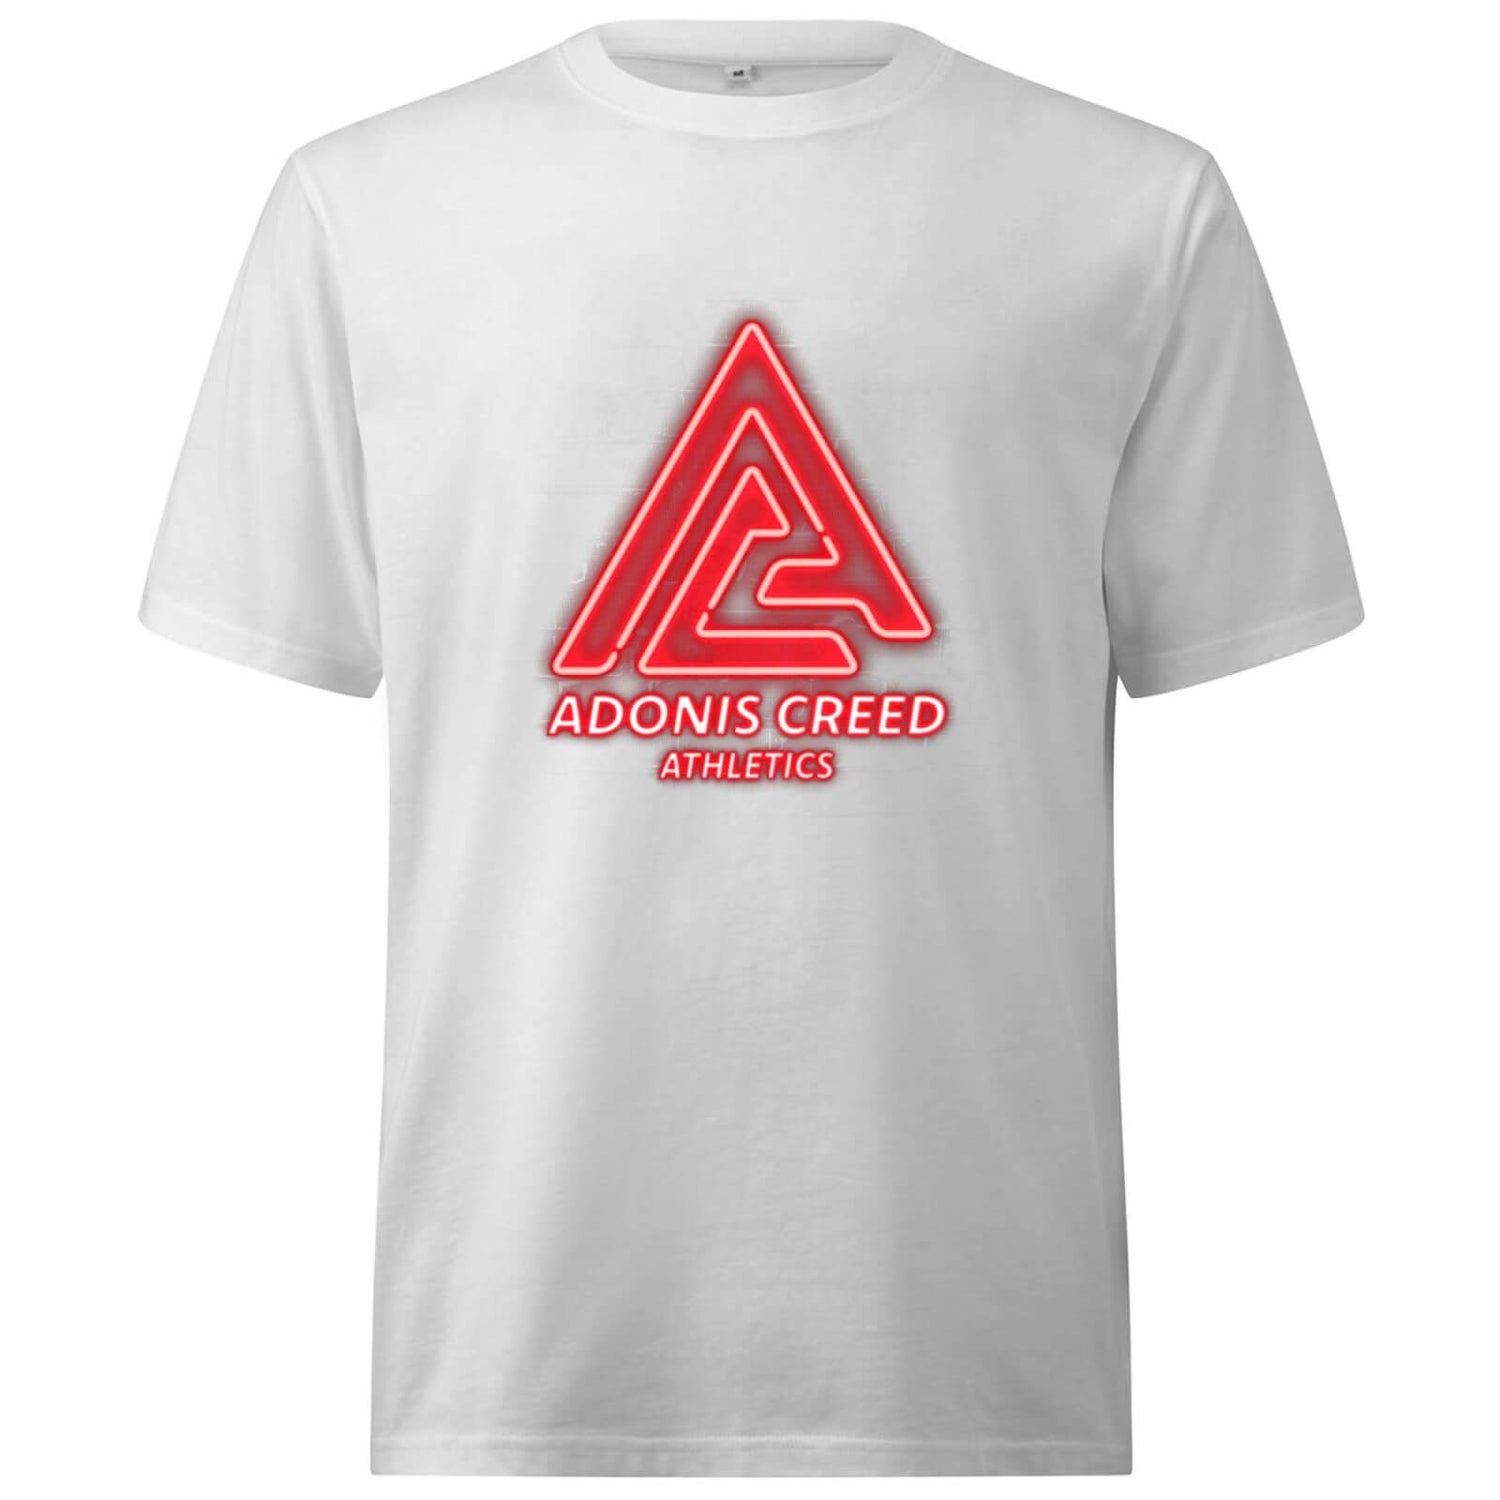 Creed Adonis Creed Athletics Neon Sign Oversized Heavyweight T-Shirt - White